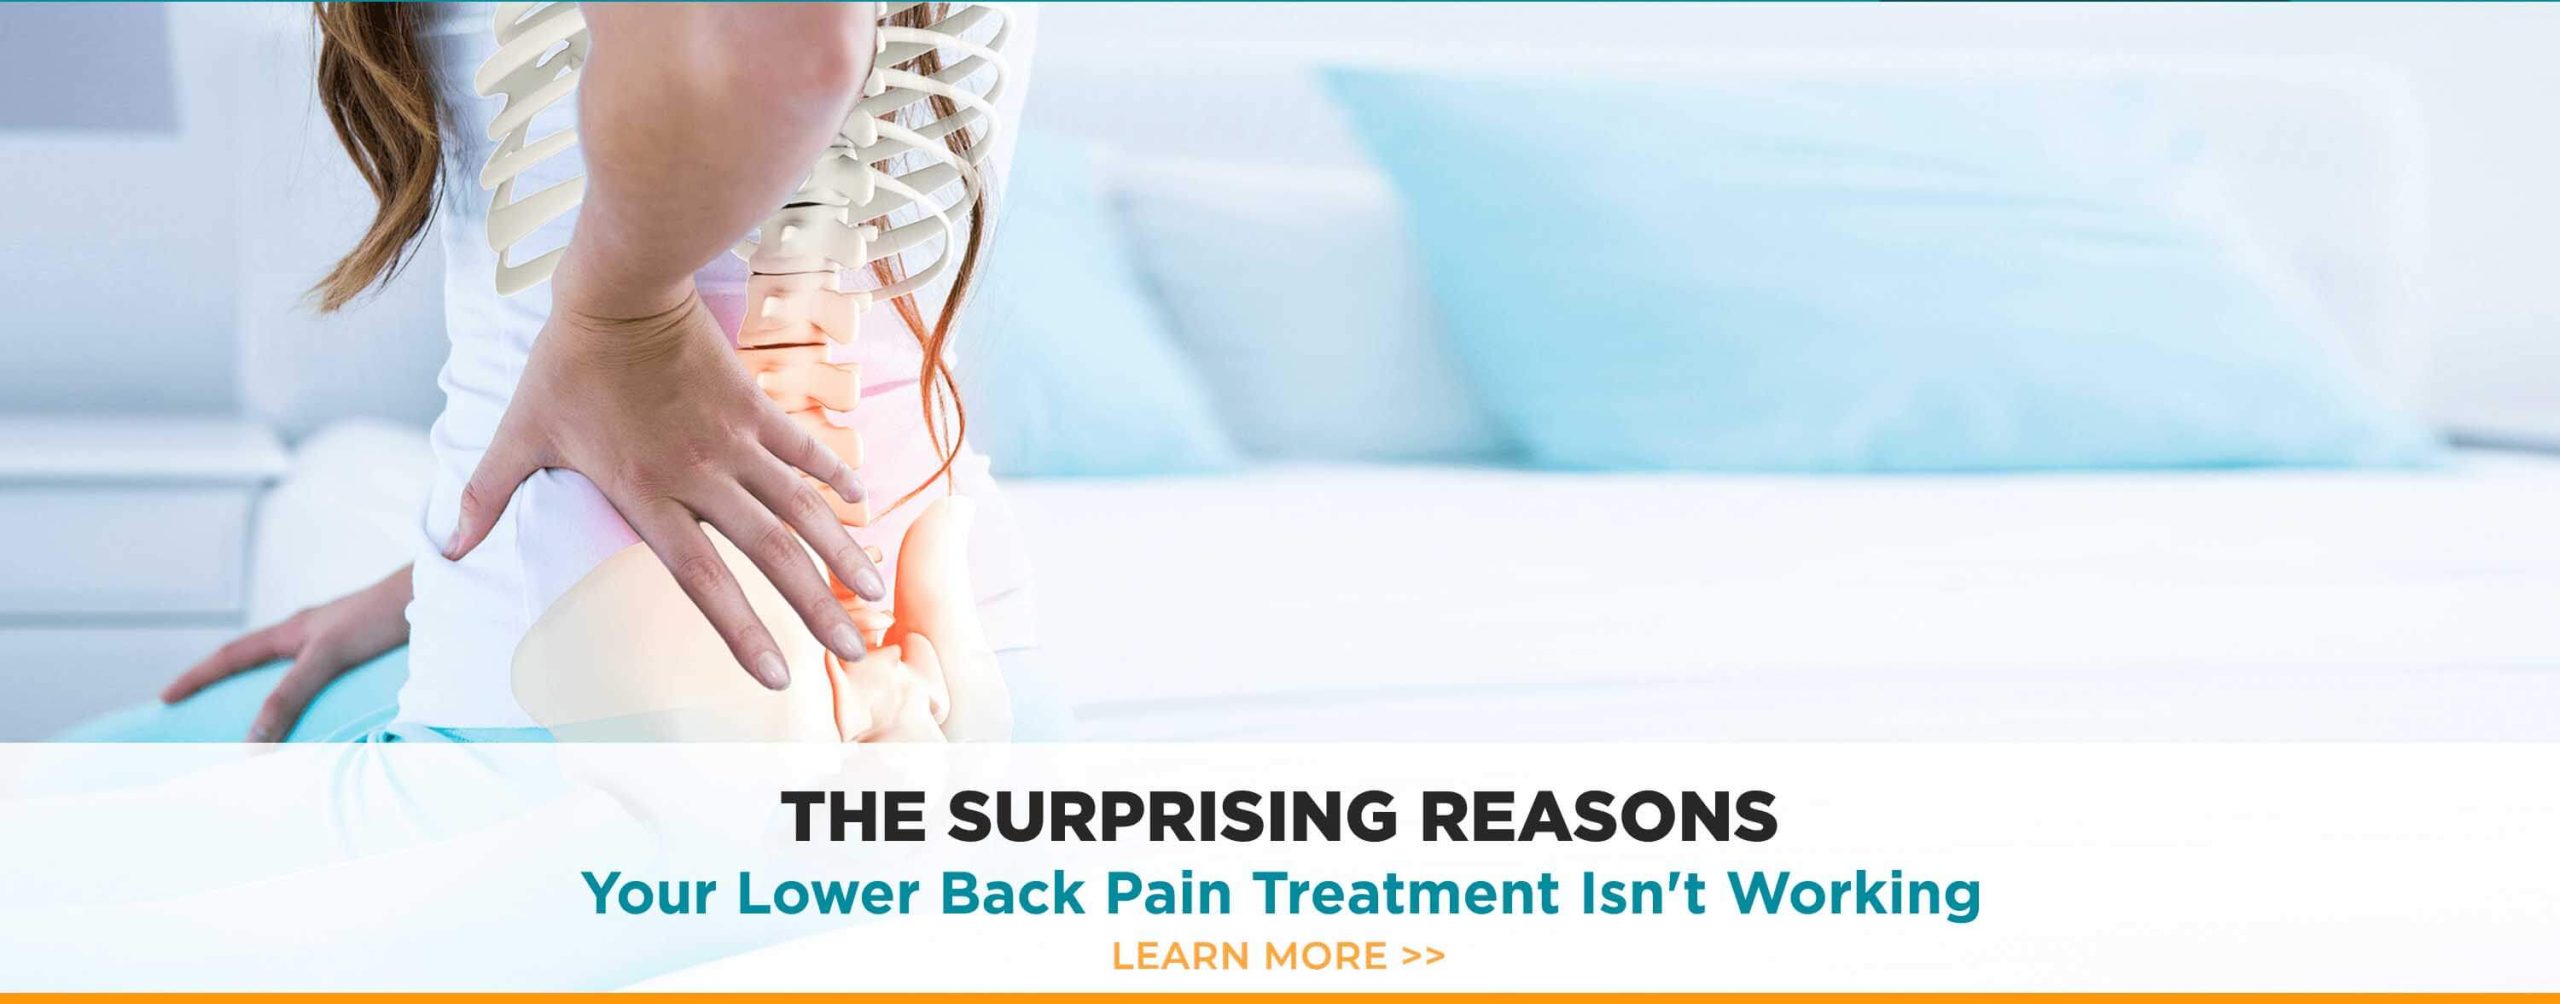 the-surprising-reasons-your-lower-back-pain-isnt-working